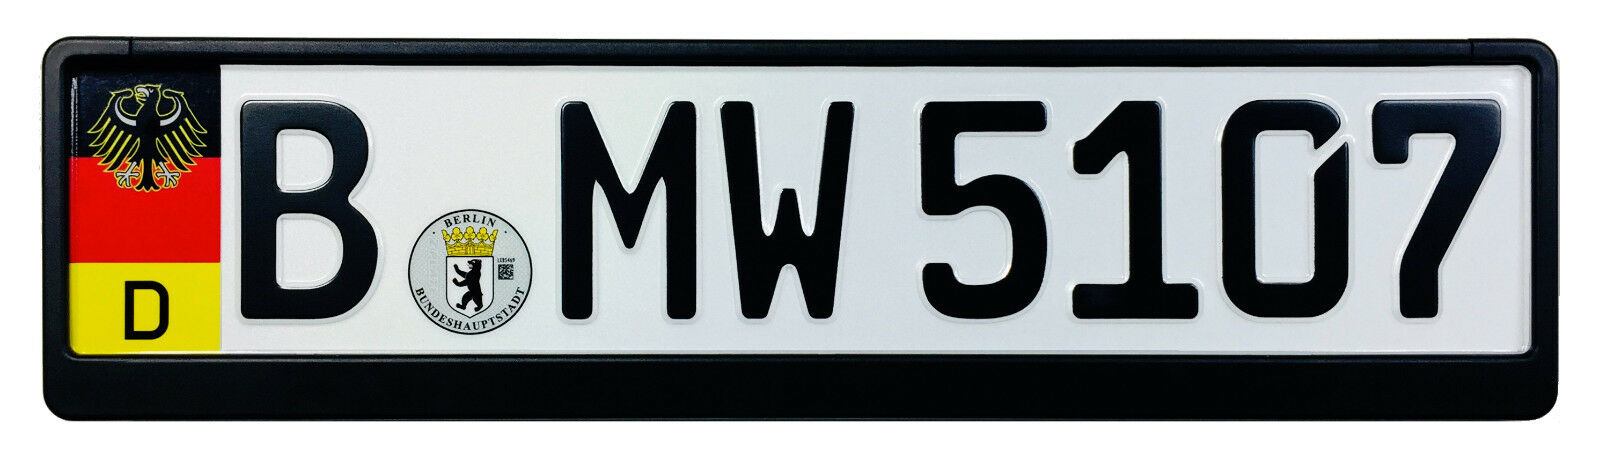 German License Plate With Coat Of Arms Eagle + Flag For Bmw, Mercedes, Vw, Audi